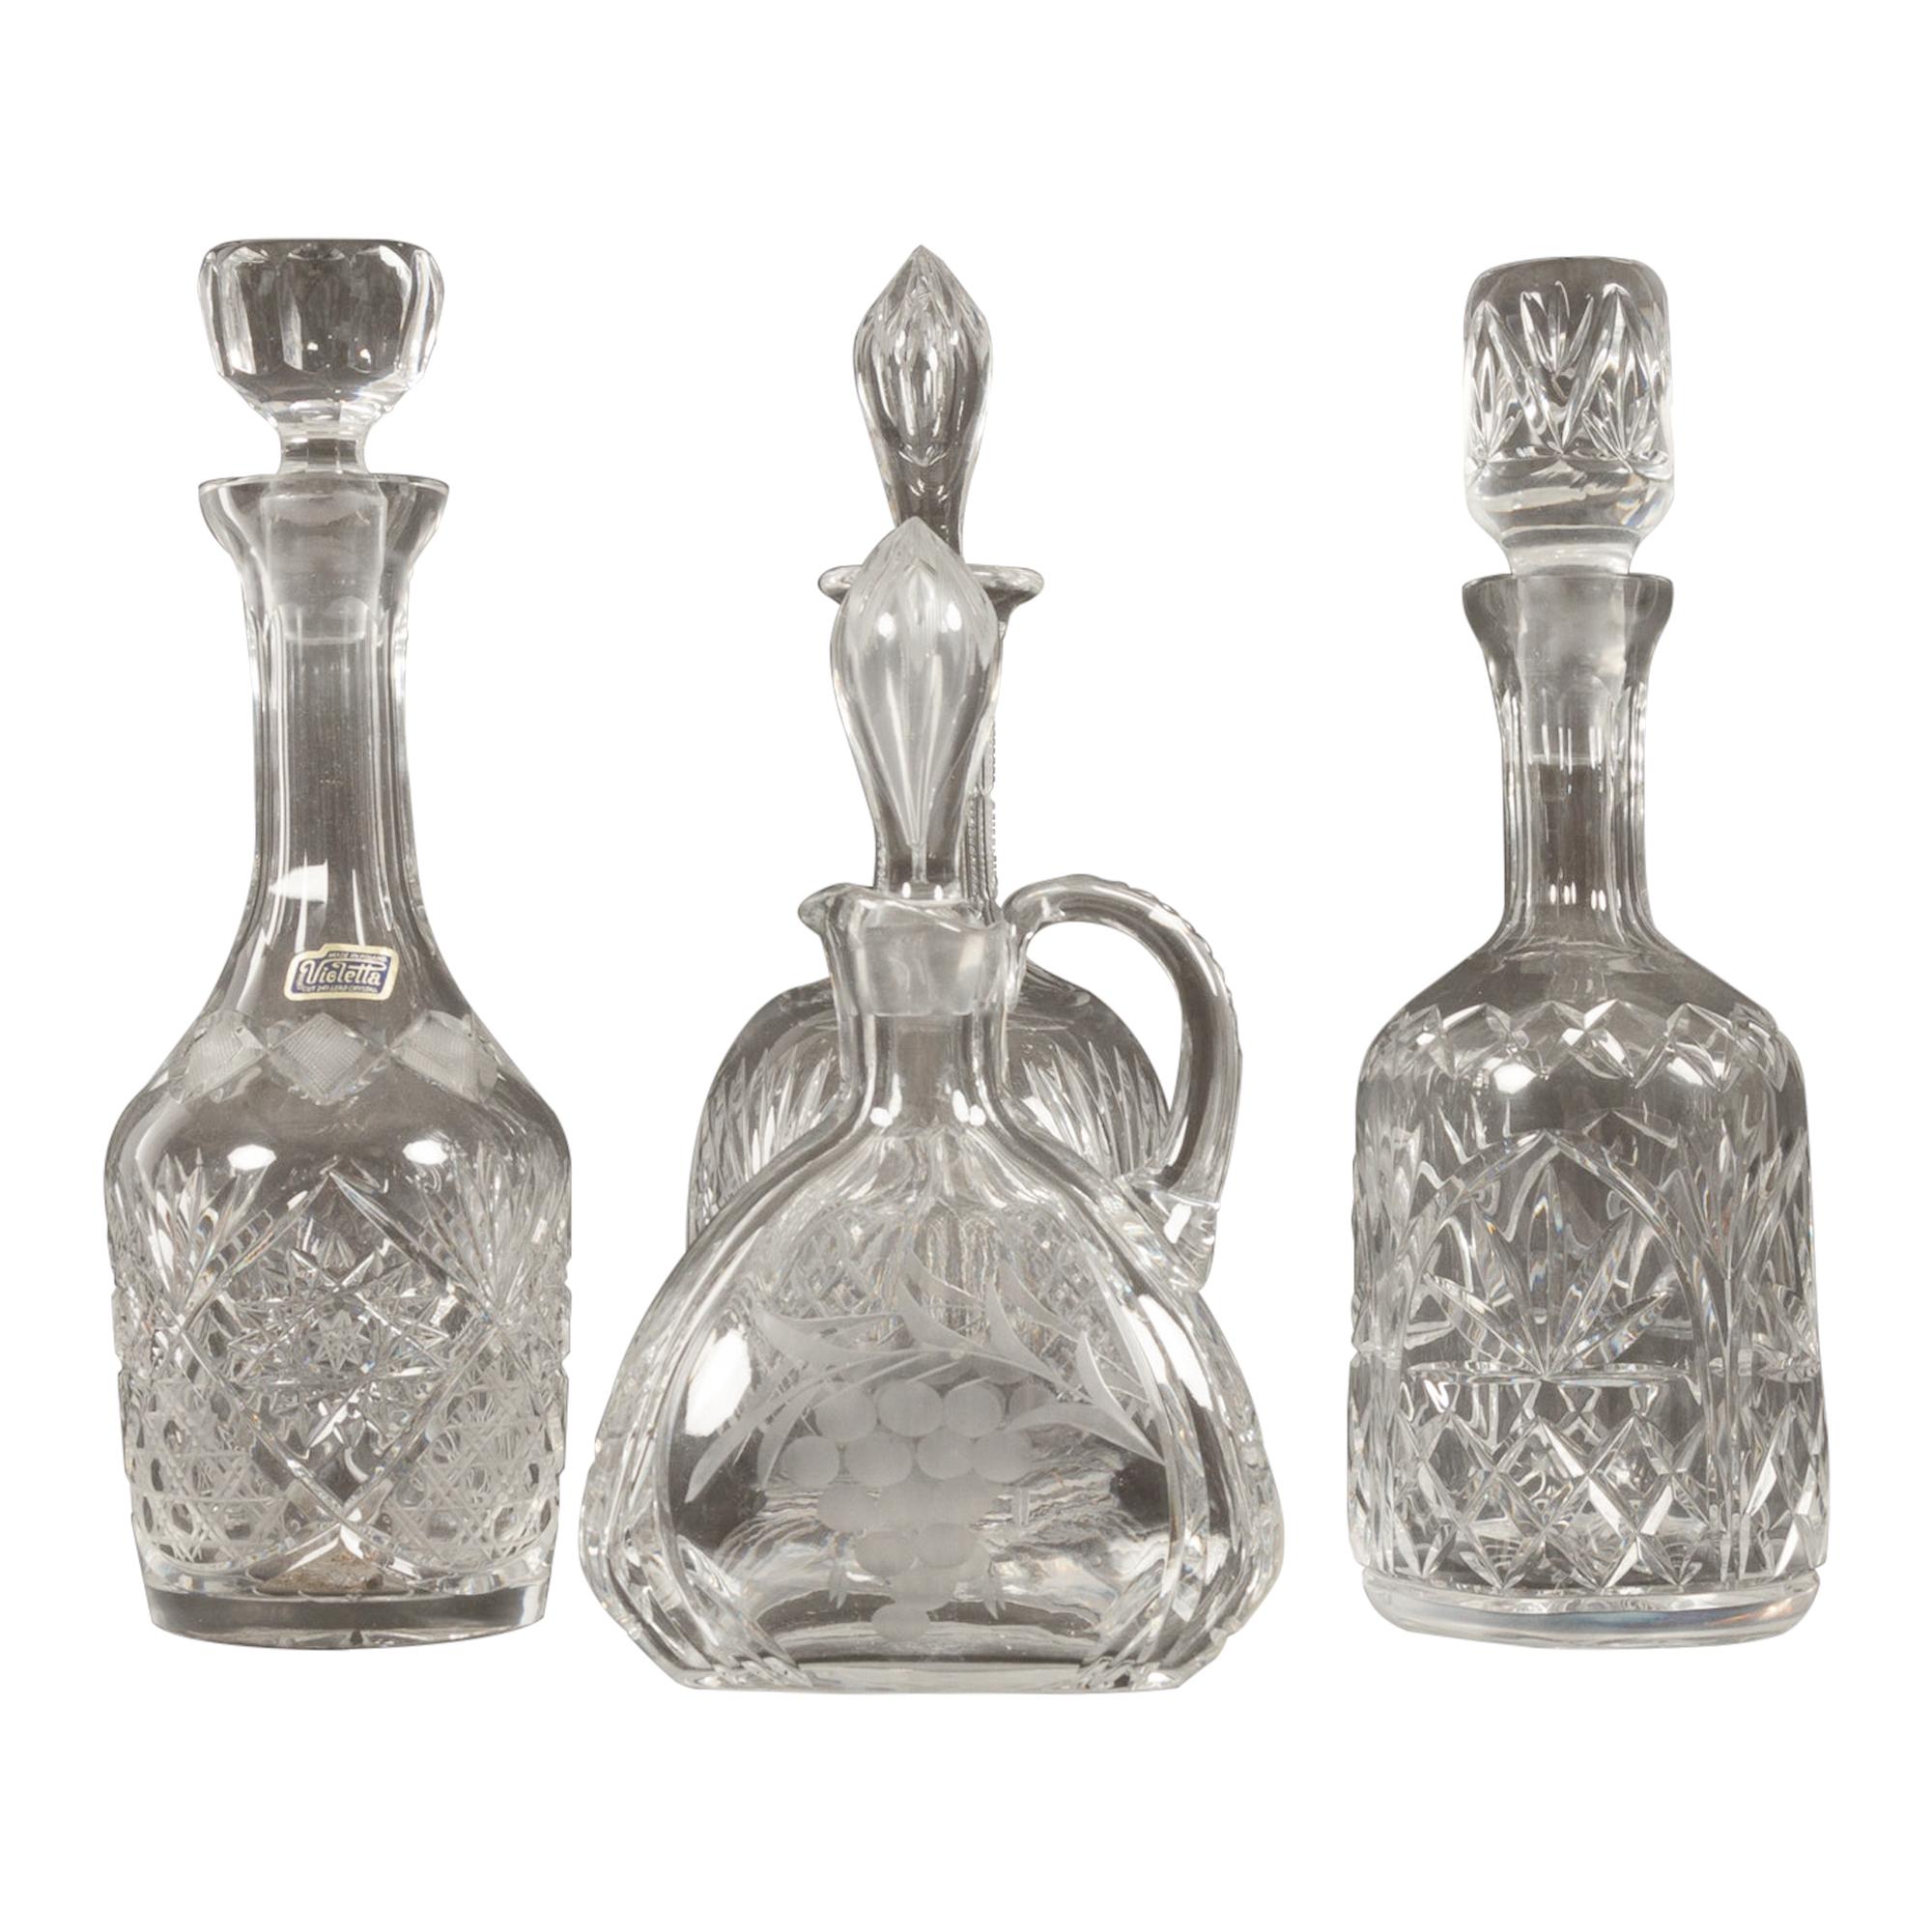 Set of 4 Crystal Decanters, Mid-20th Century